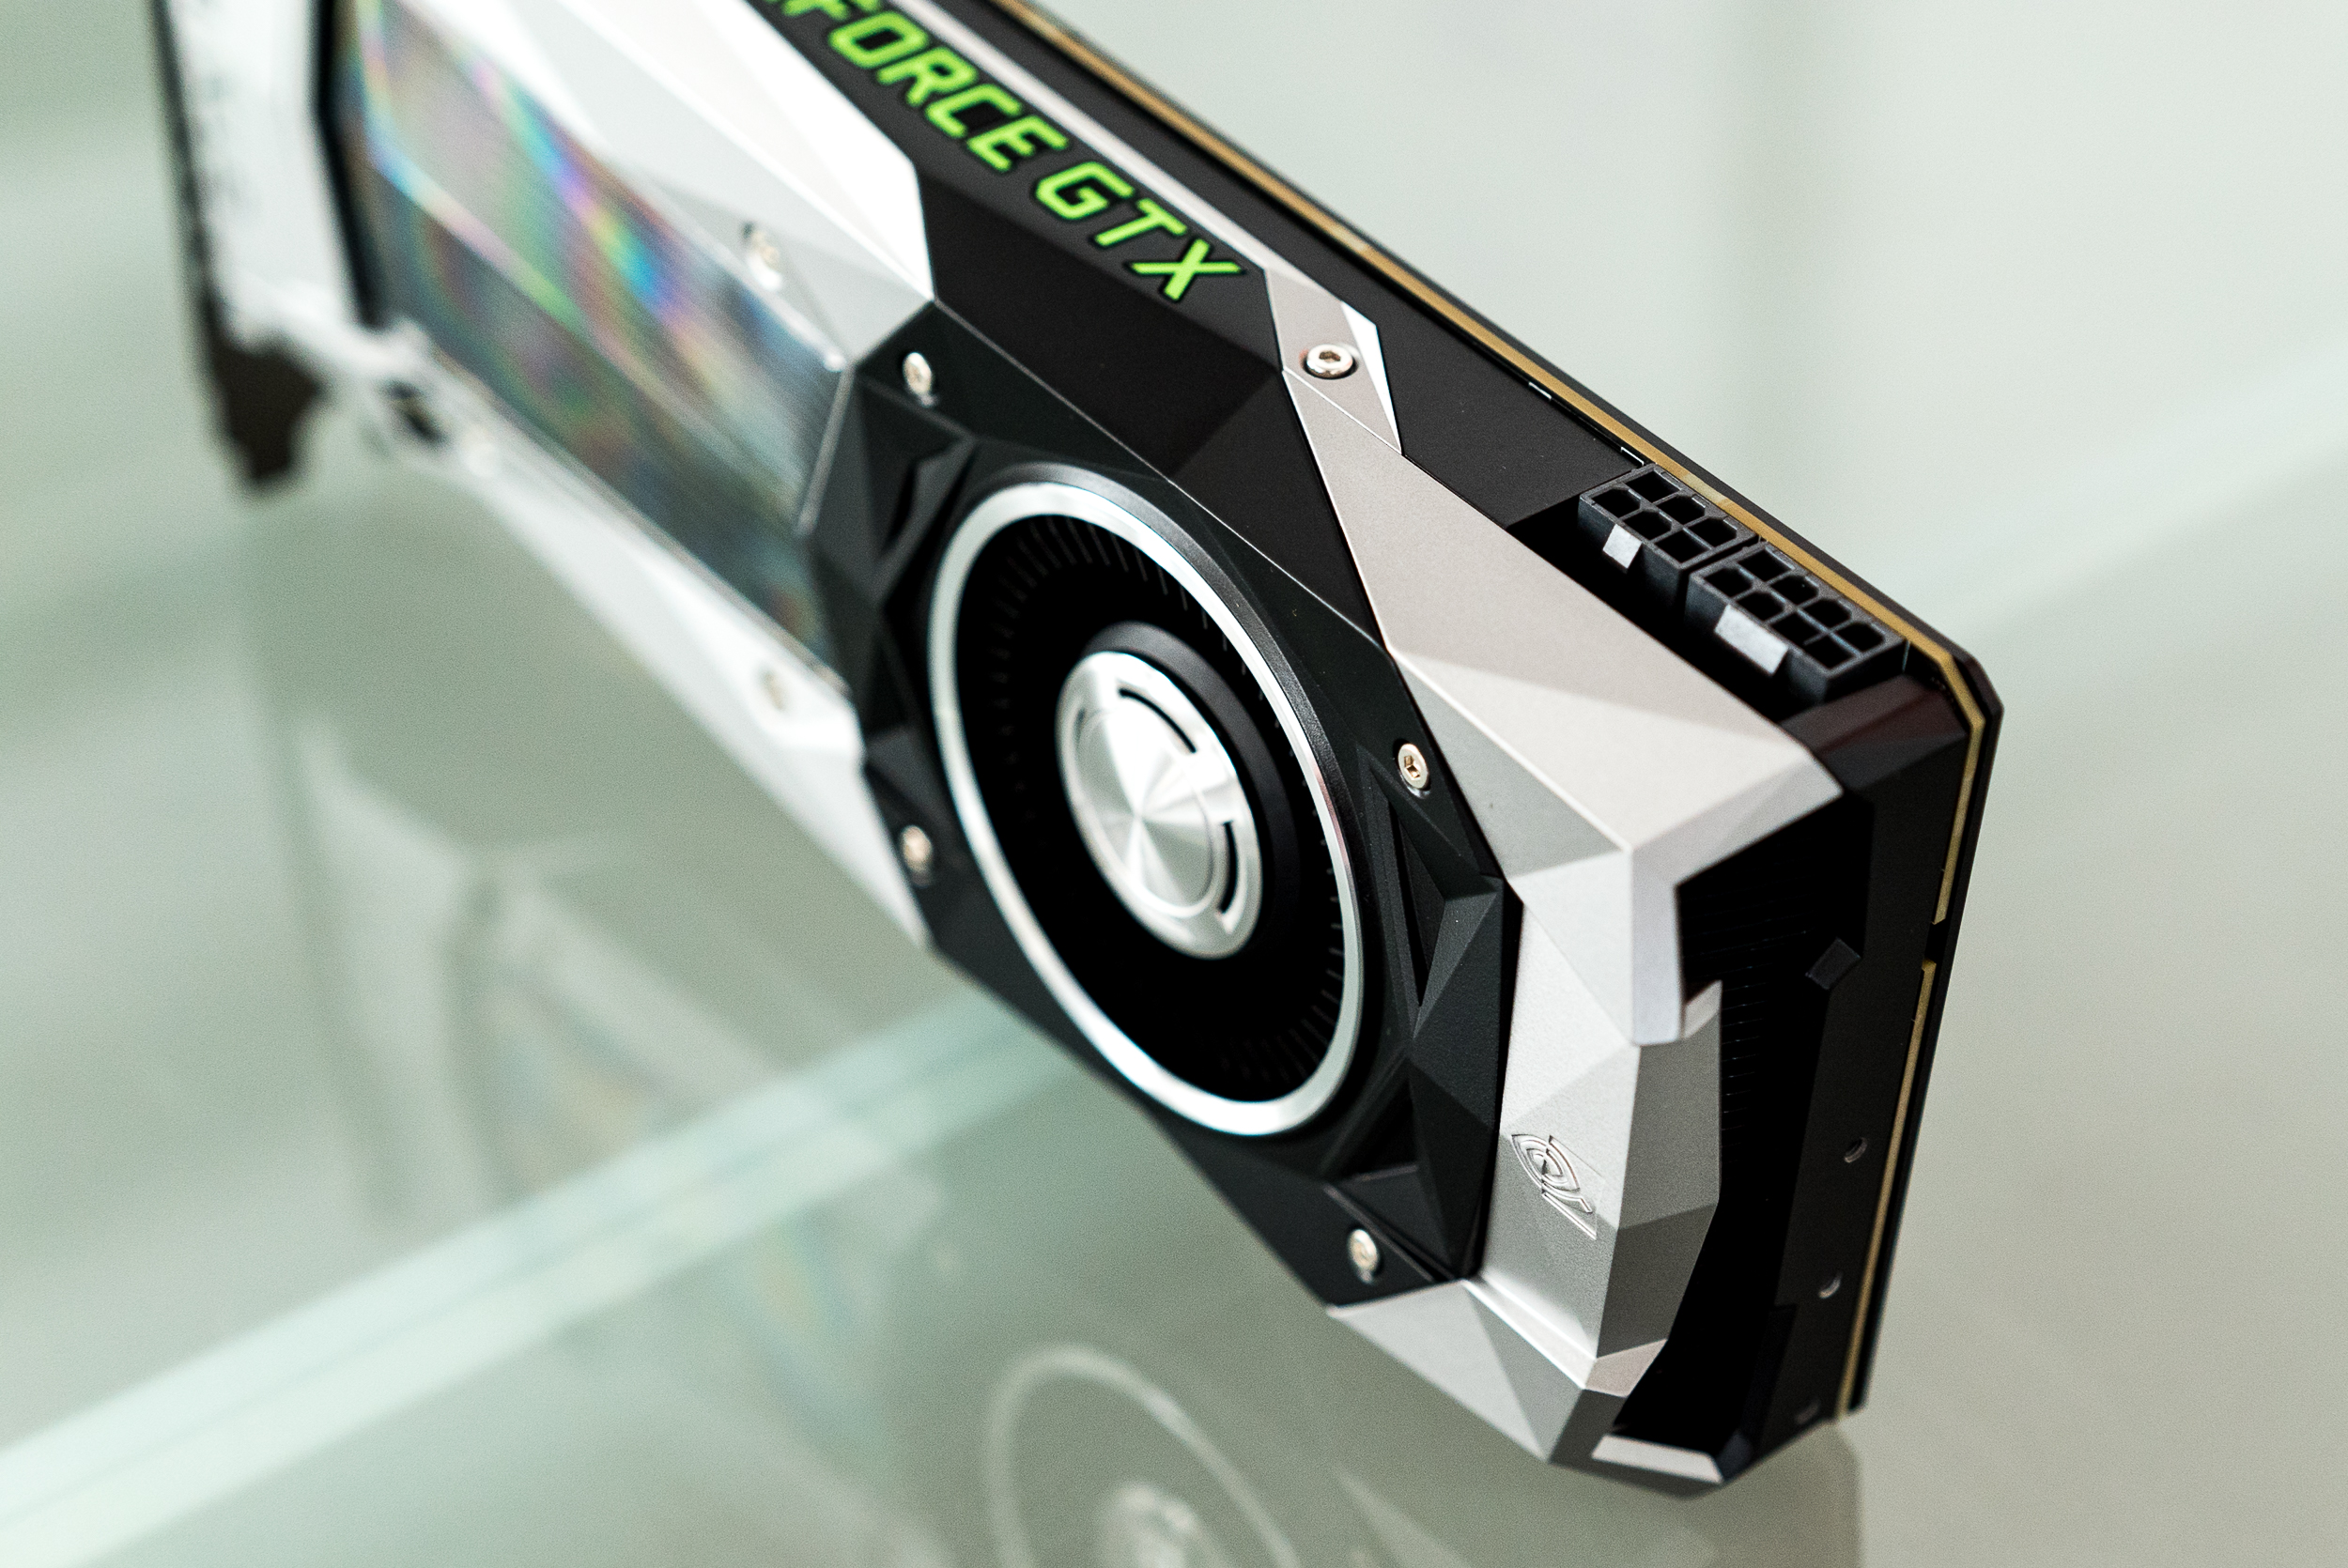 Nvidia GTX 1080 Ti review The fastest graphics card, again Ars Technica